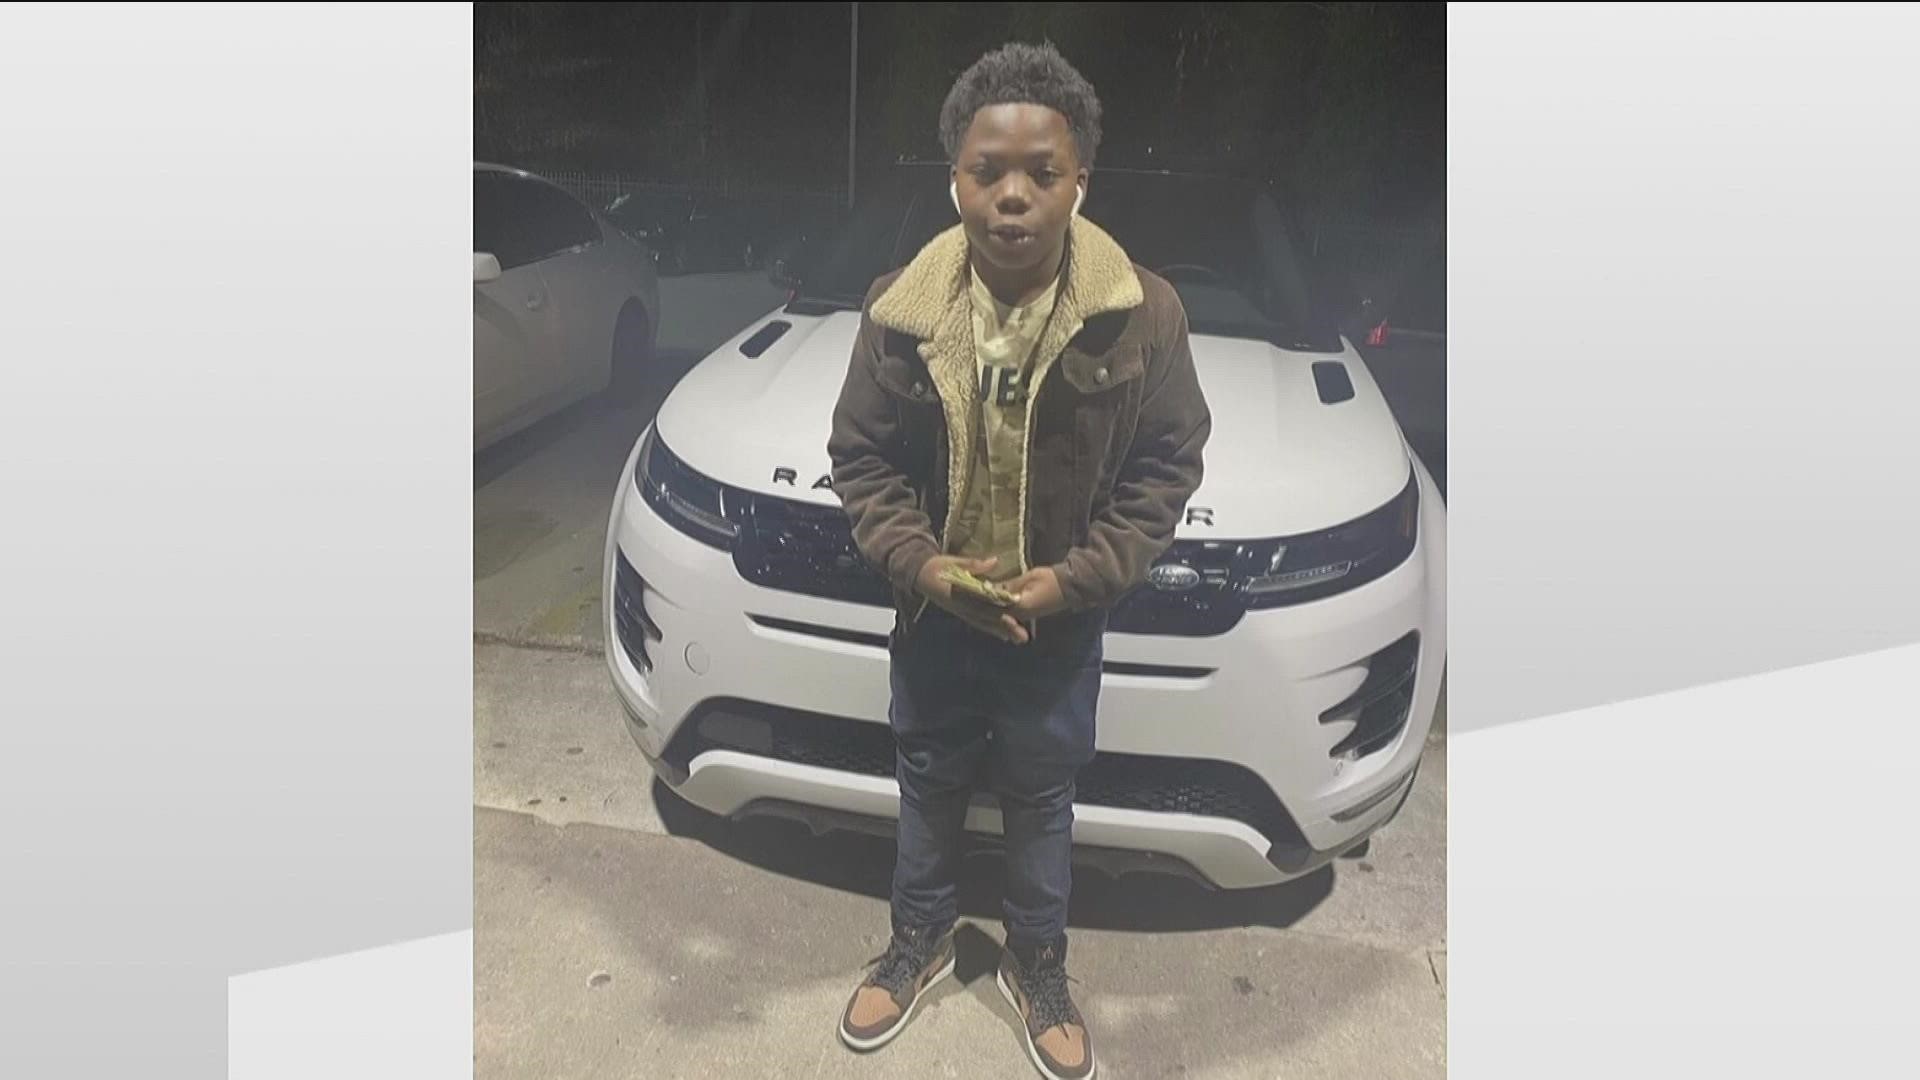 Zyion Charles was identified as the boy killed in a fatal shooting that left five other teenagers wounded following an argument that broke out between a large group.